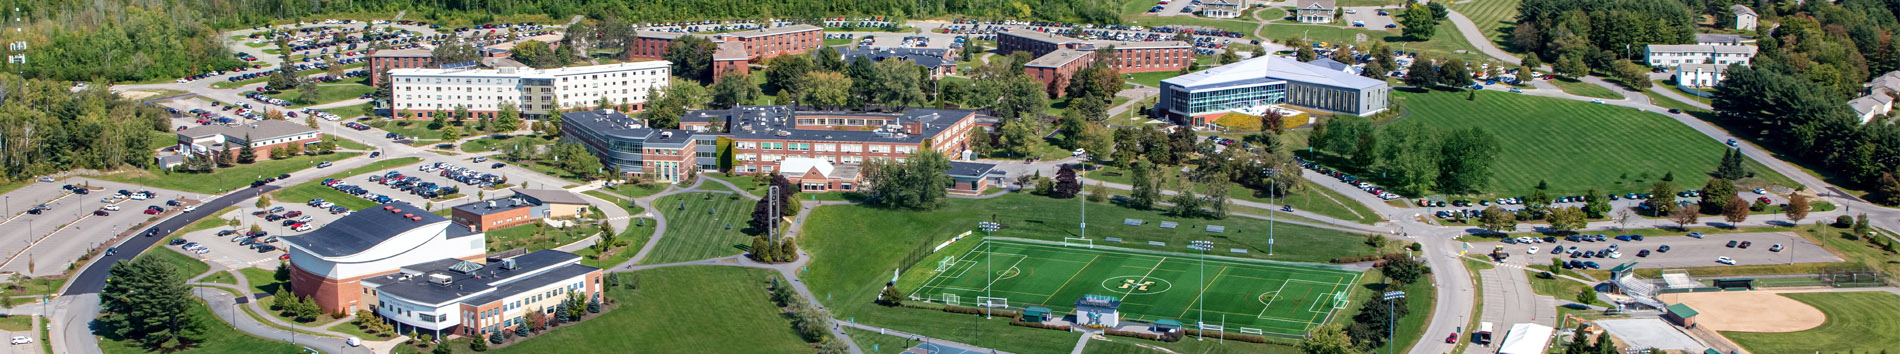 Aerial photo of the Husson University campus